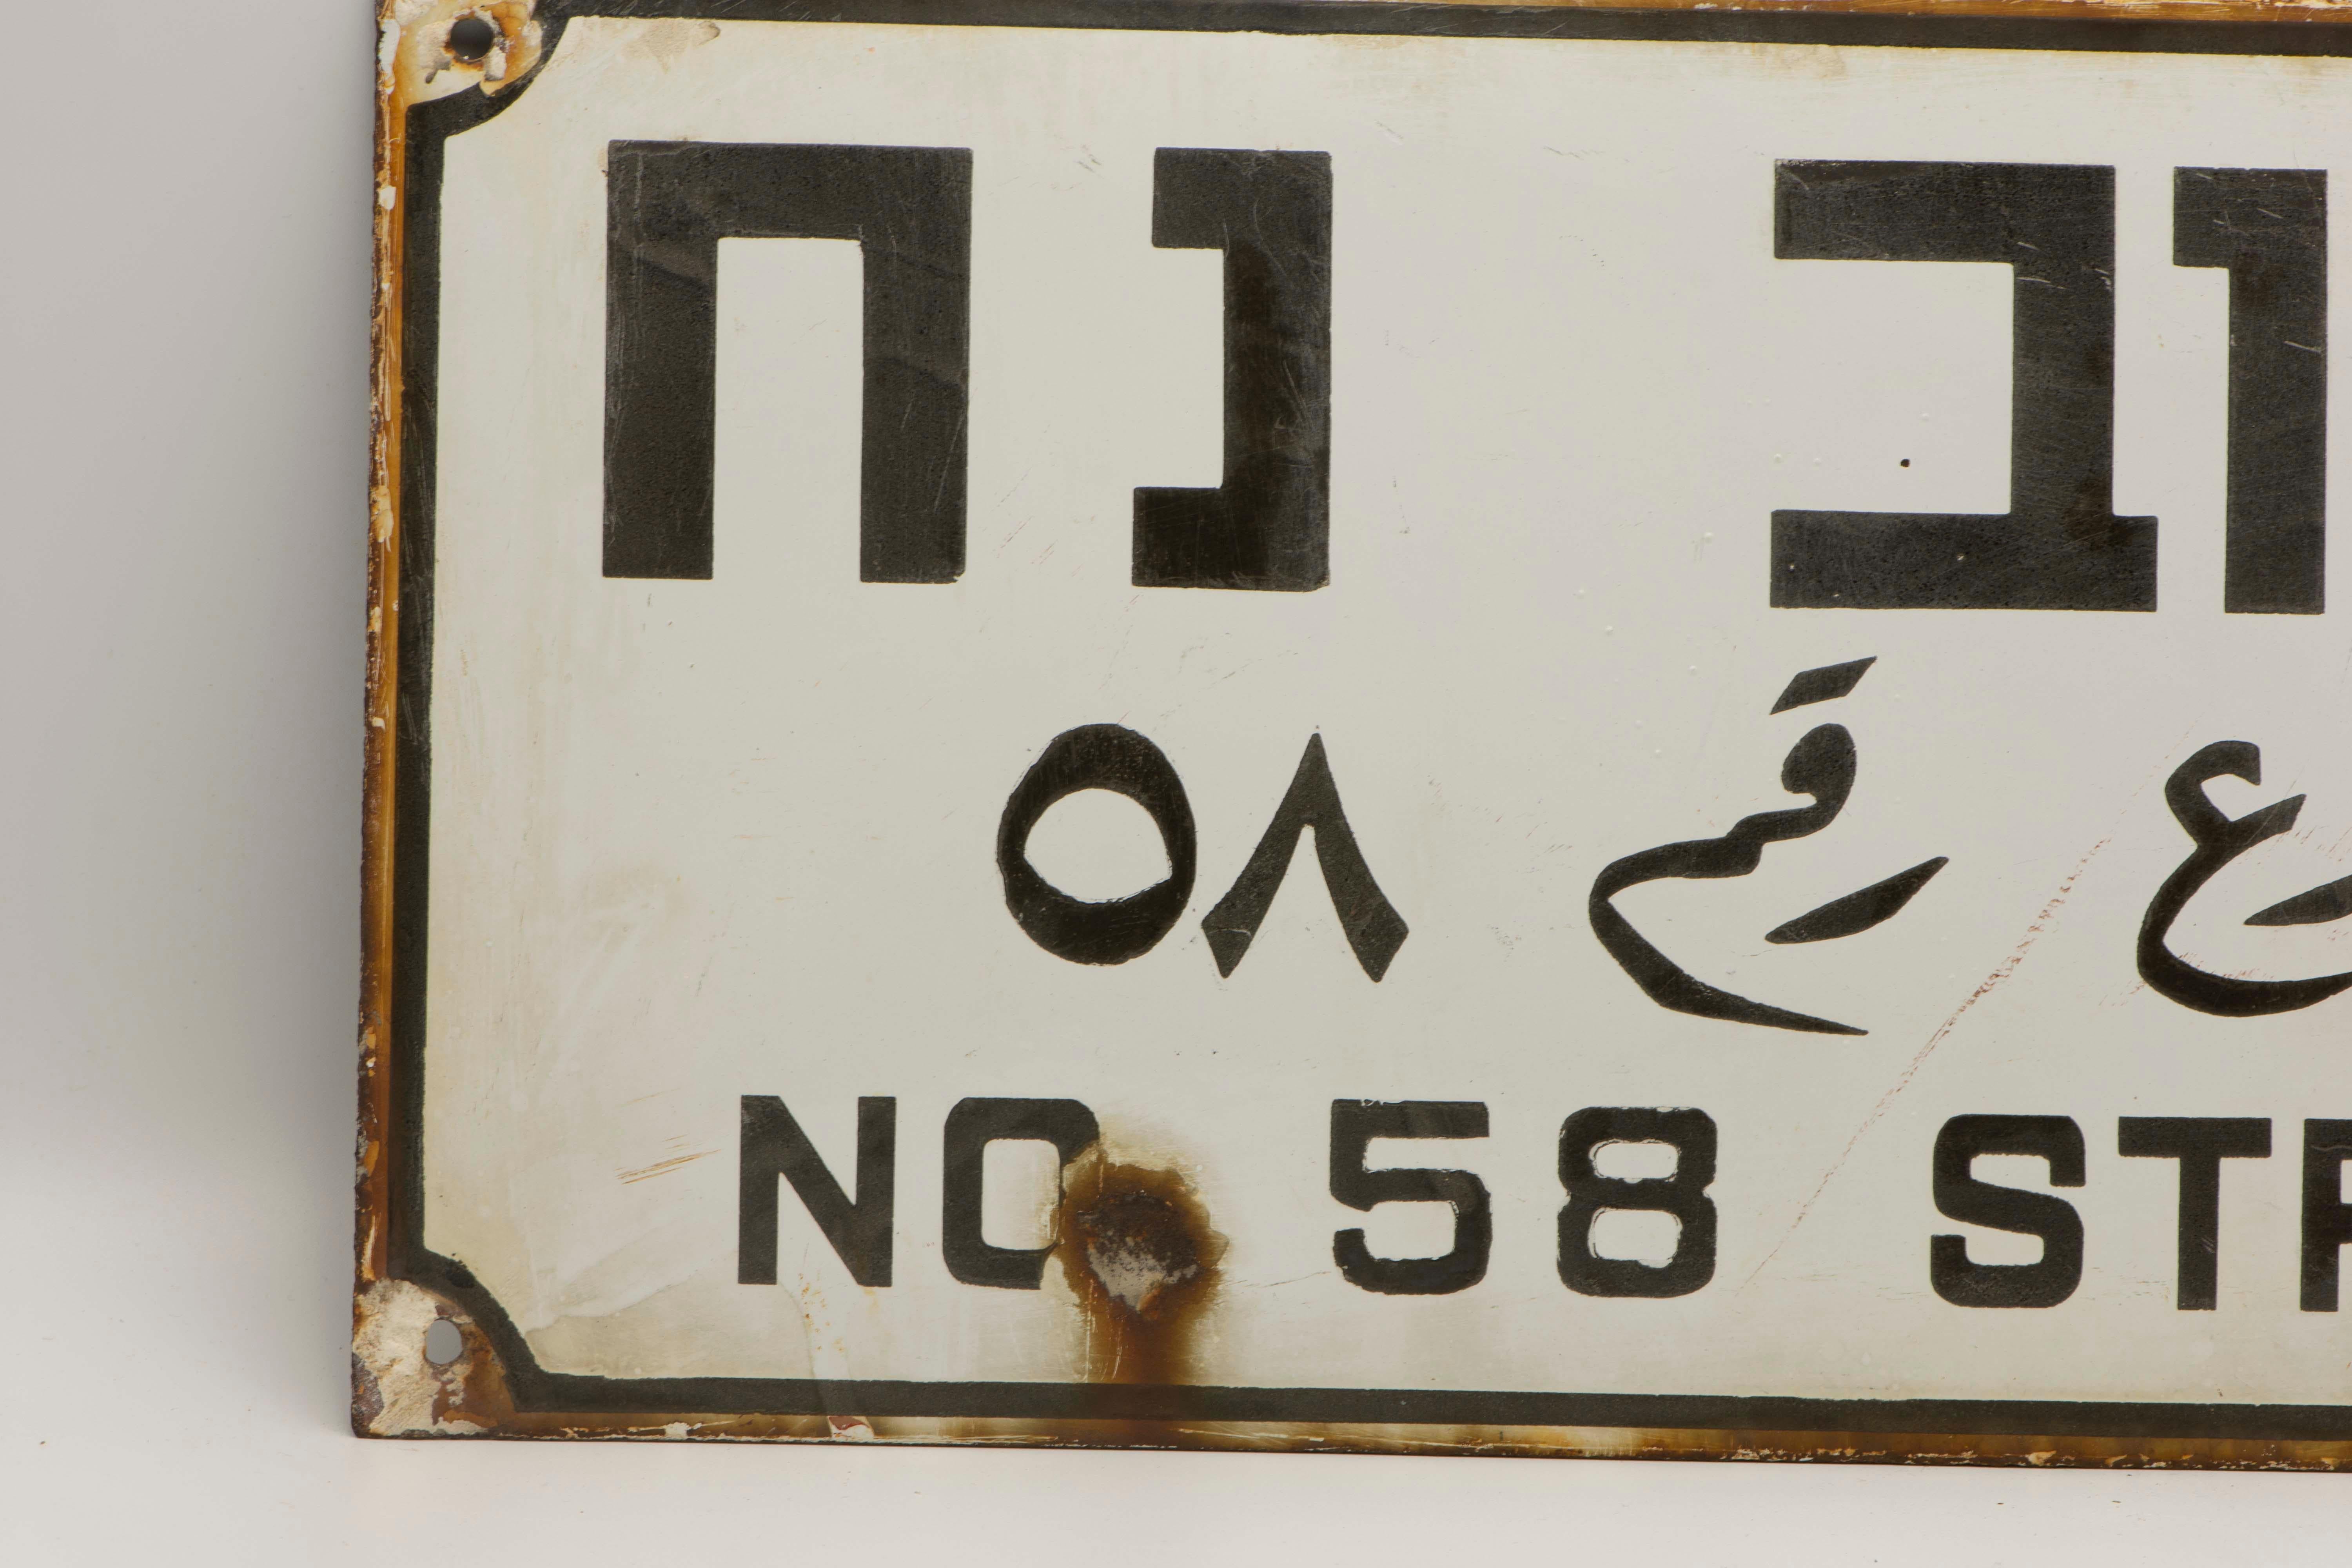 Three languages iron and enamel street sign, circa 1920.
The sign was made for 58 street in the city of Haifa. The three languages indicate the sign was made during British mandate in Palestine. The sign is made of iron and enamel - in later years